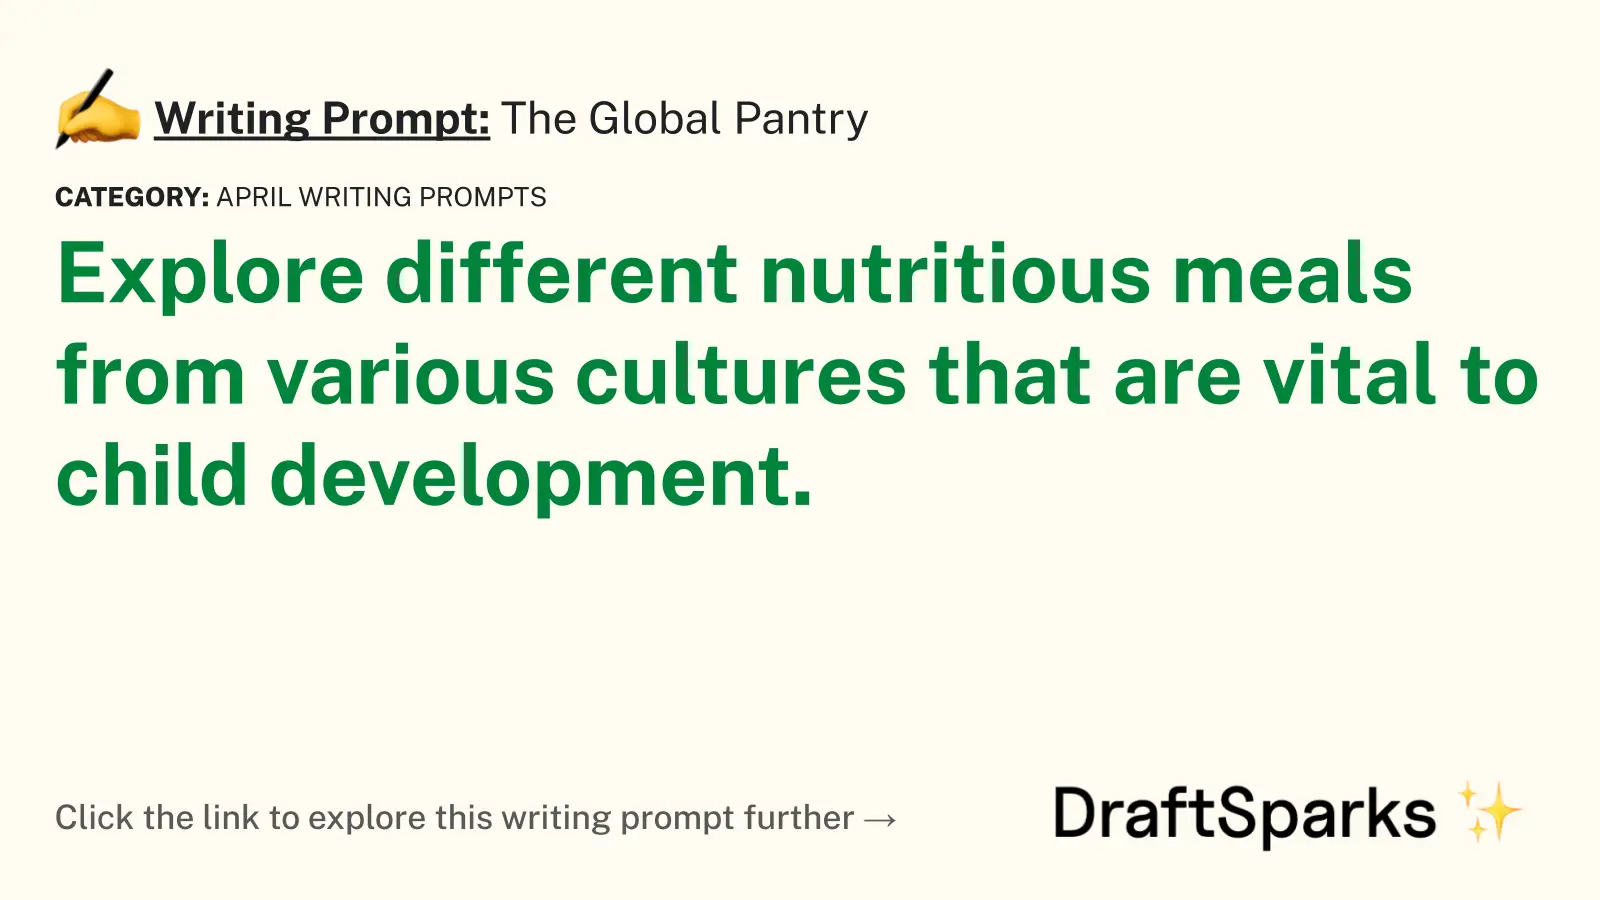 The Global Pantry